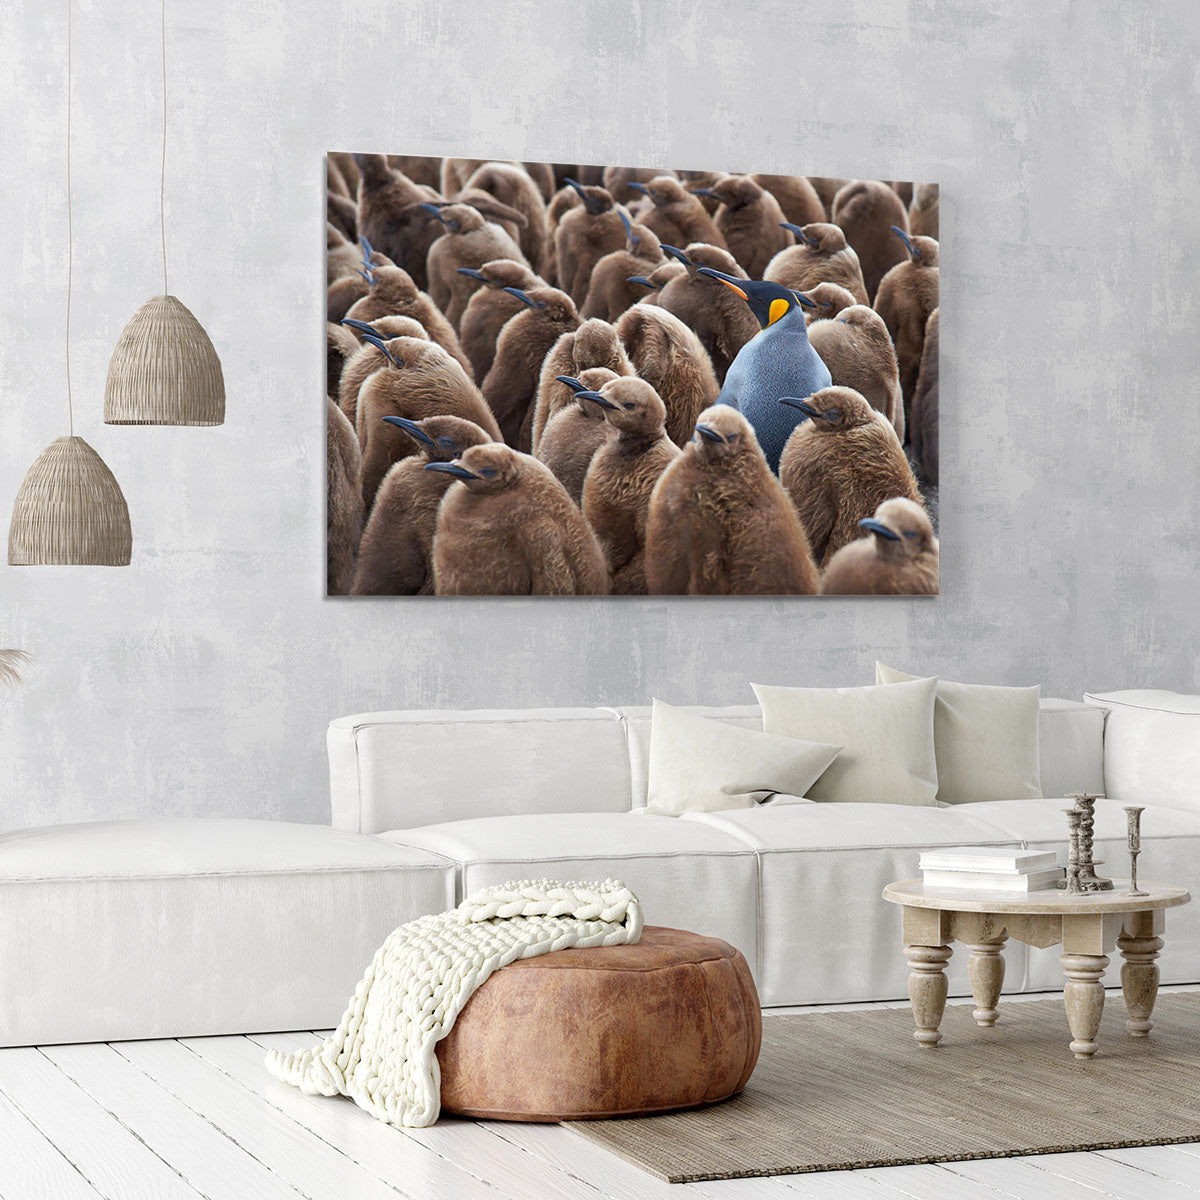 Adult King Penguin Aptenodytes patagonicus standing amongst a large group Canvas Print or Poster - Canvas Art Rocks - 6